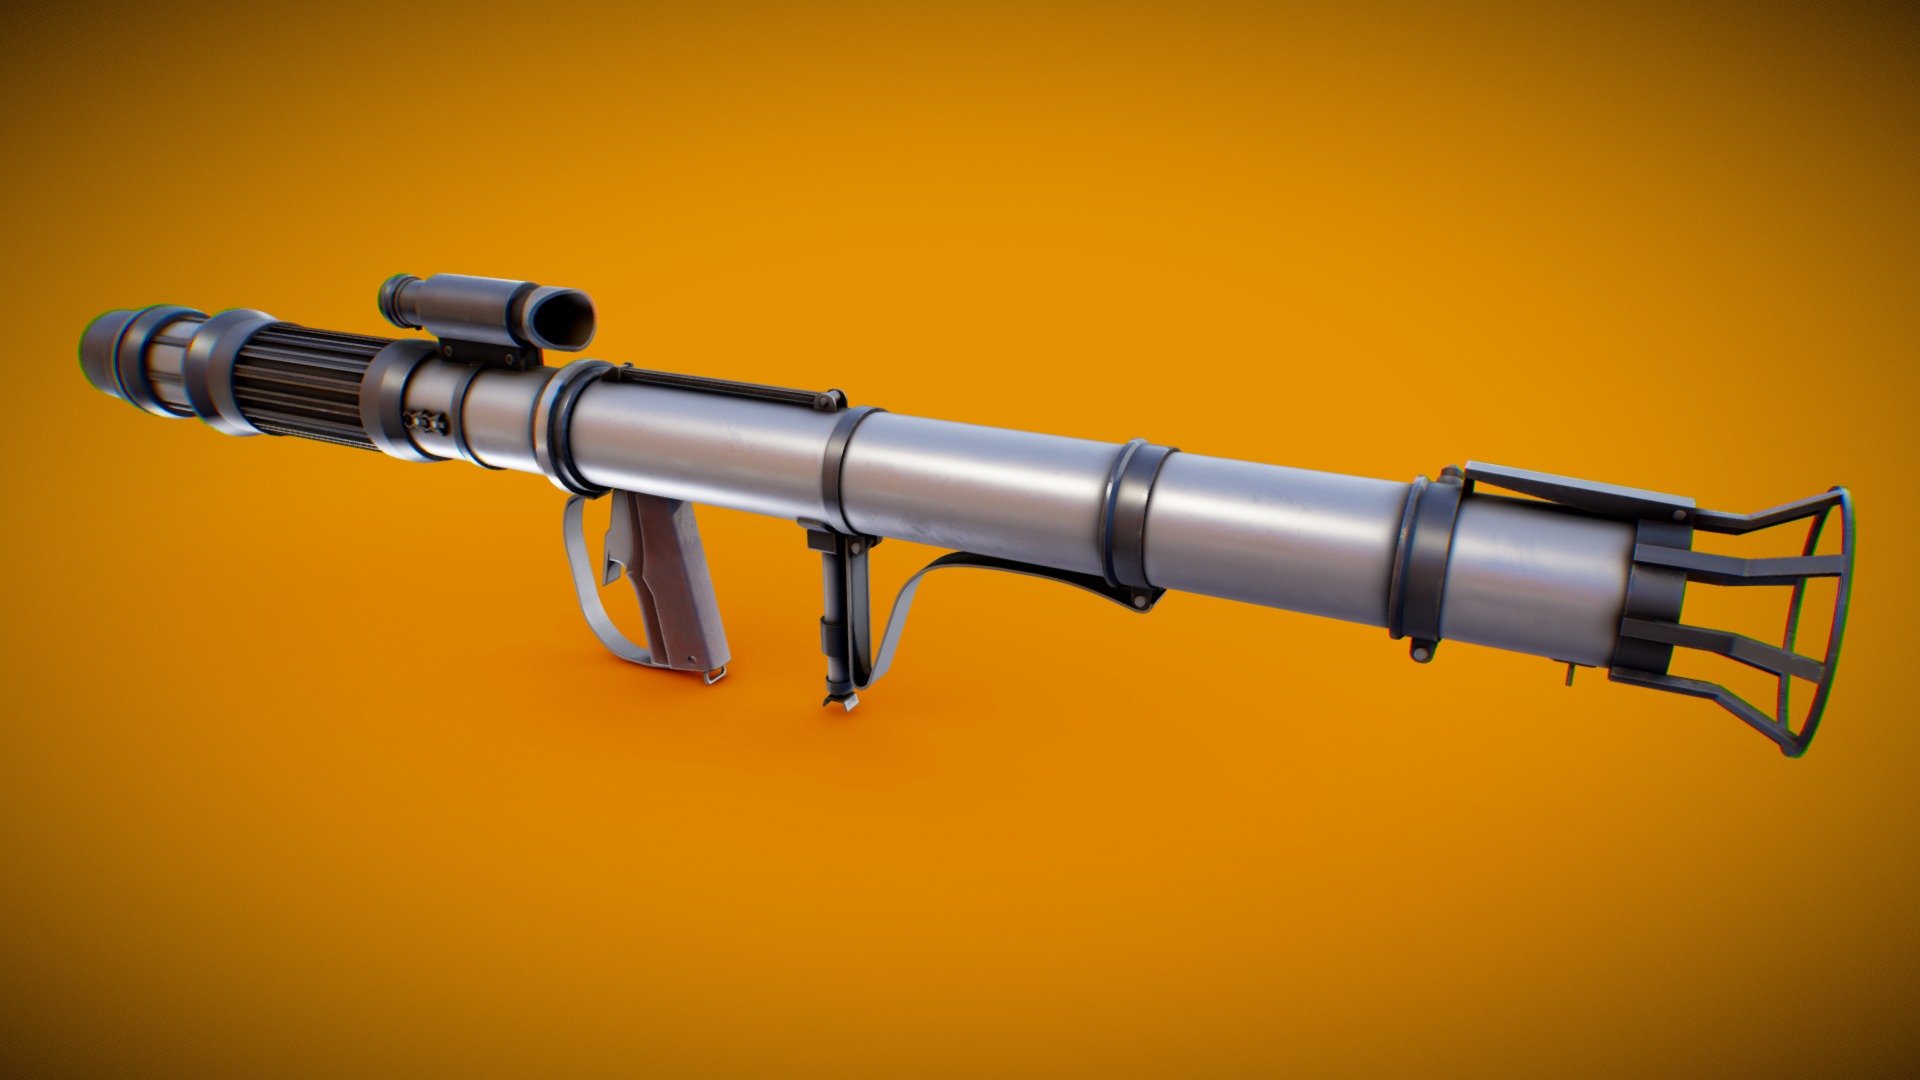 The main Rocket Launcher of the grand army of the republic.

created for the star wars squad mod &ldquo;Galactic Contention